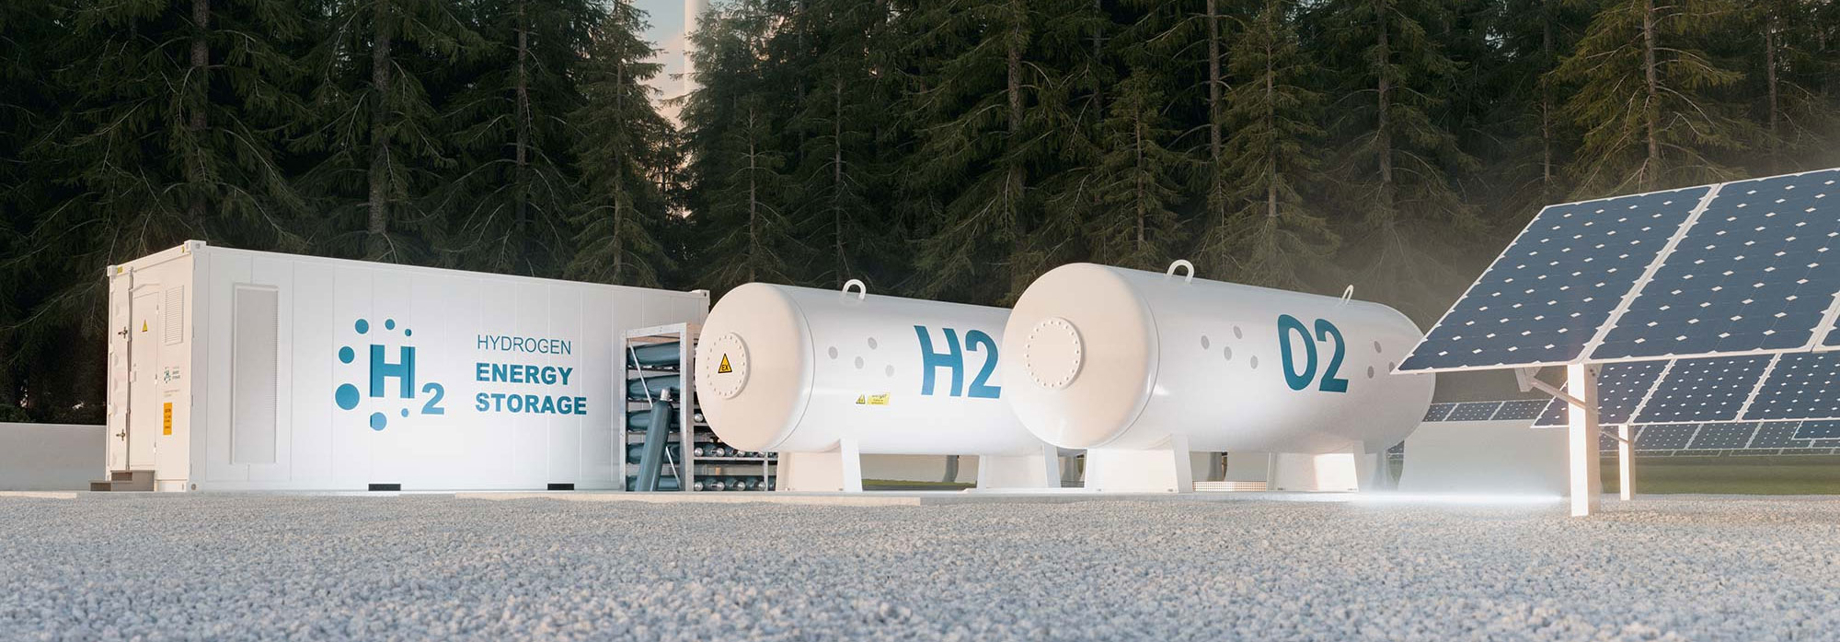 Hydrogen and other renewables in a CGI render